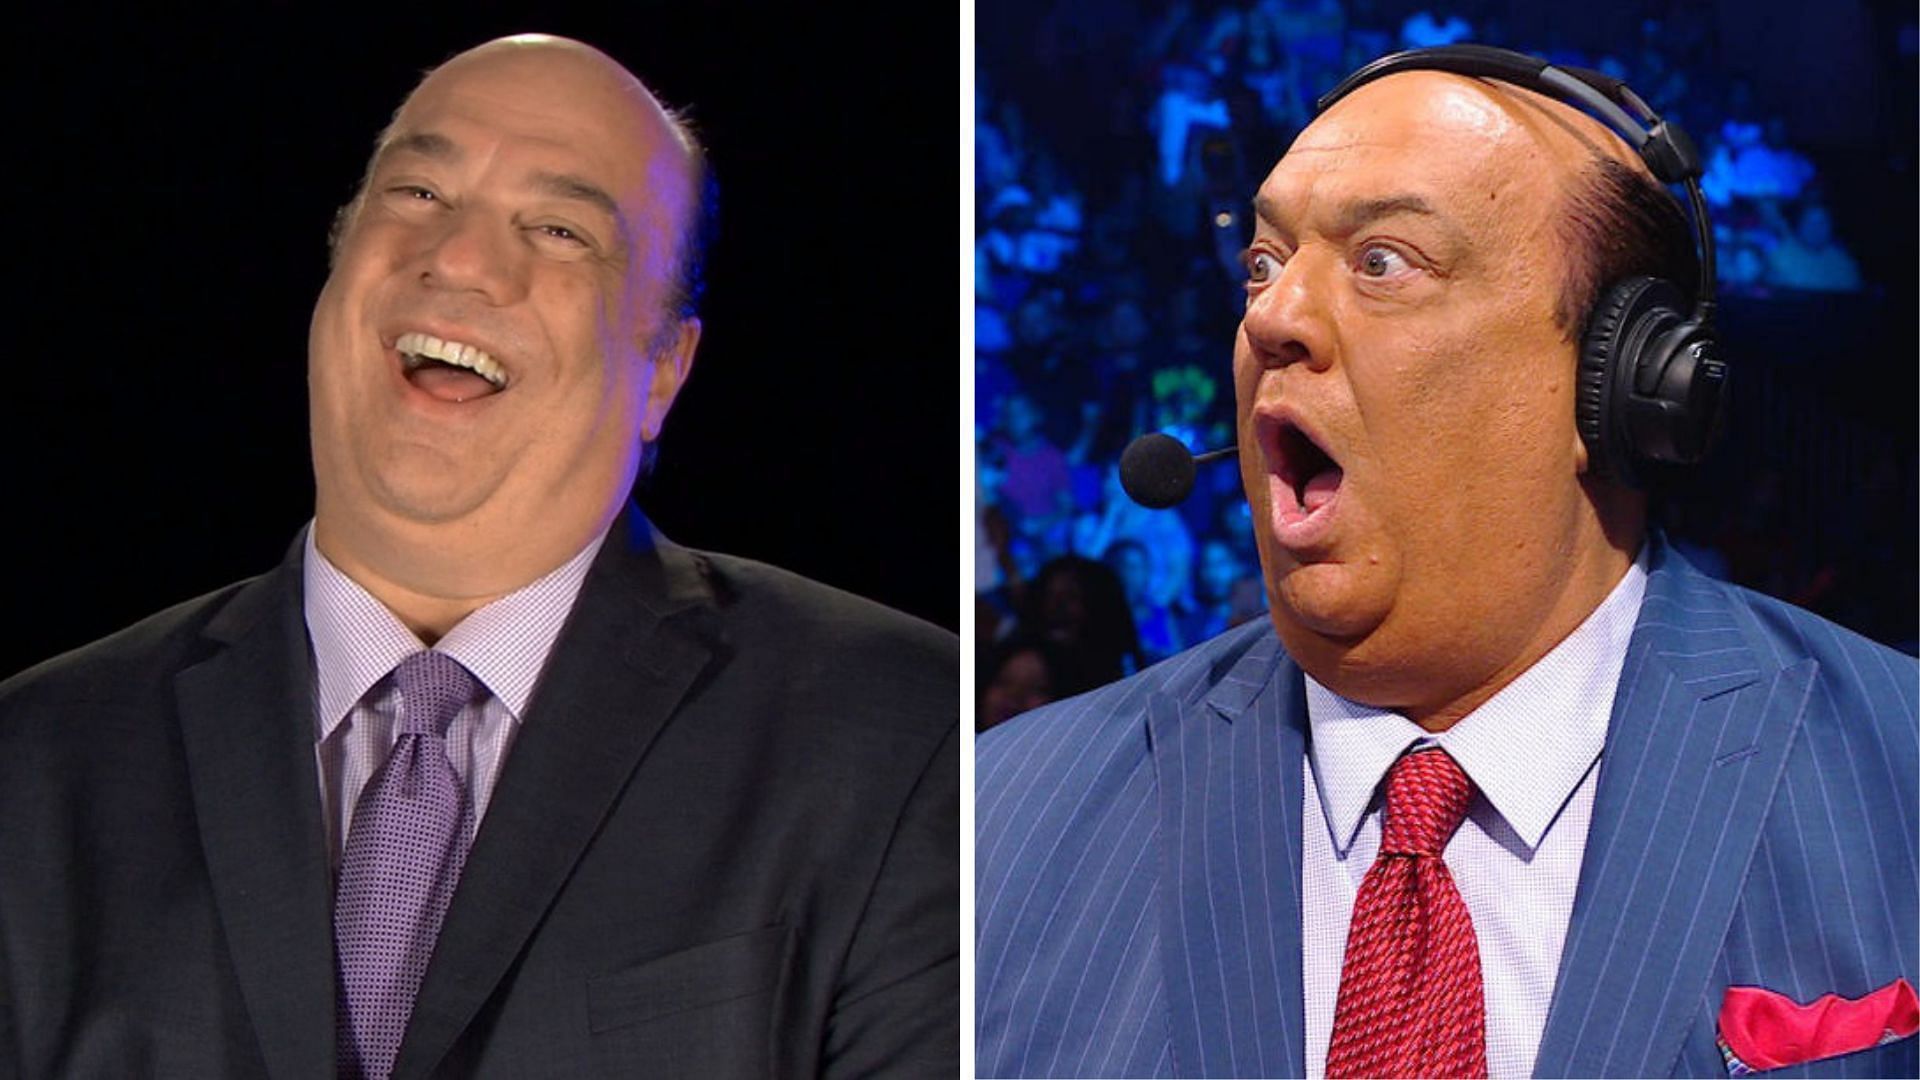 Paul Heyman is currently The Wiseman in The Bloodline on WWE SmackDown